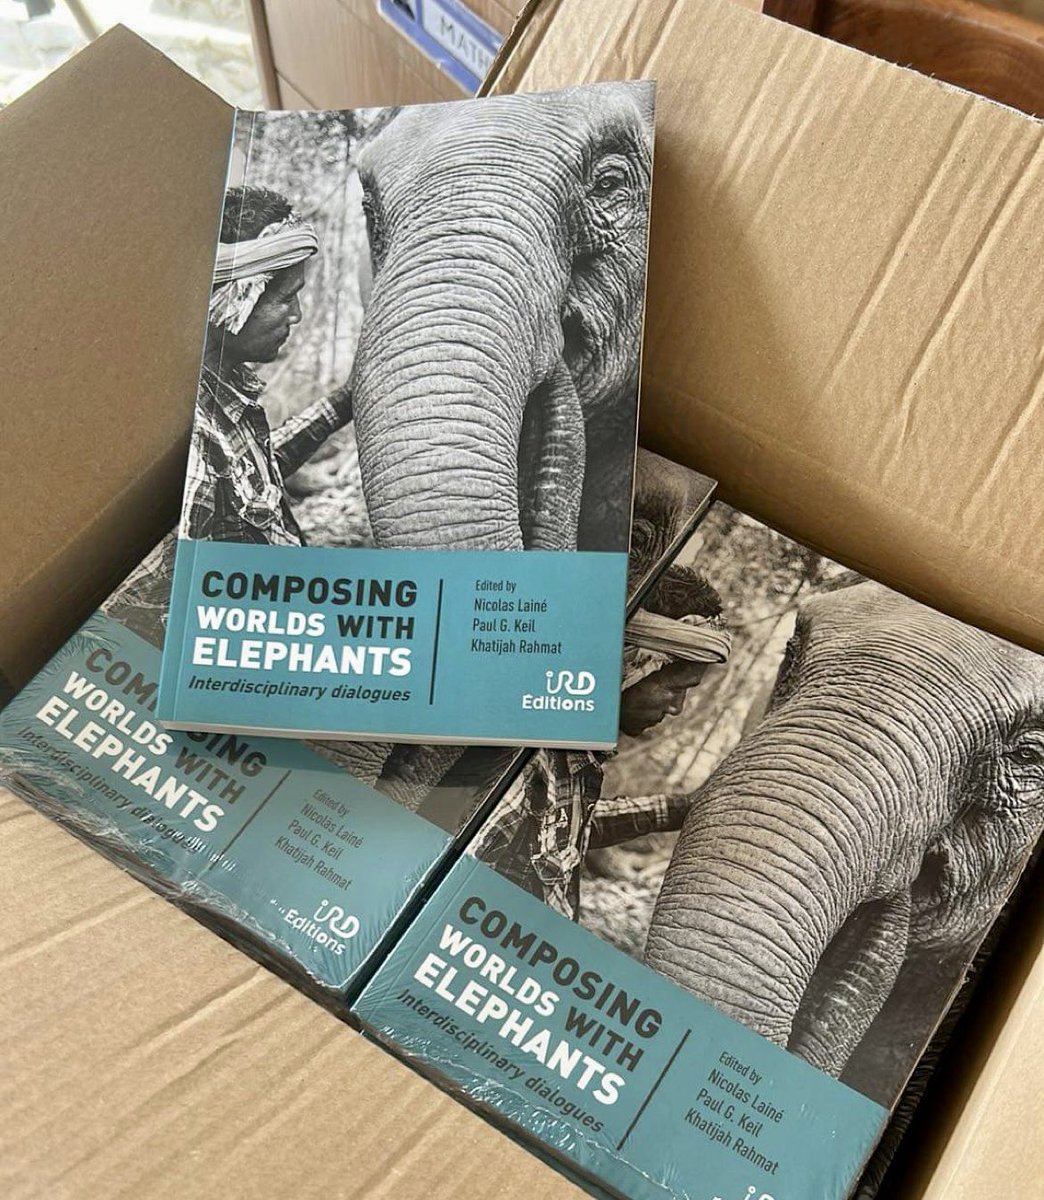 My editor’s copies arrived today from @ird_fr Editions ! Official publication date of Composing Worlds with Elephants  (both the paperback and free ebook) is October 5 !

Huge thanks to my coeditors @pgkeil and @khatijah  and all the contributors of the volume !